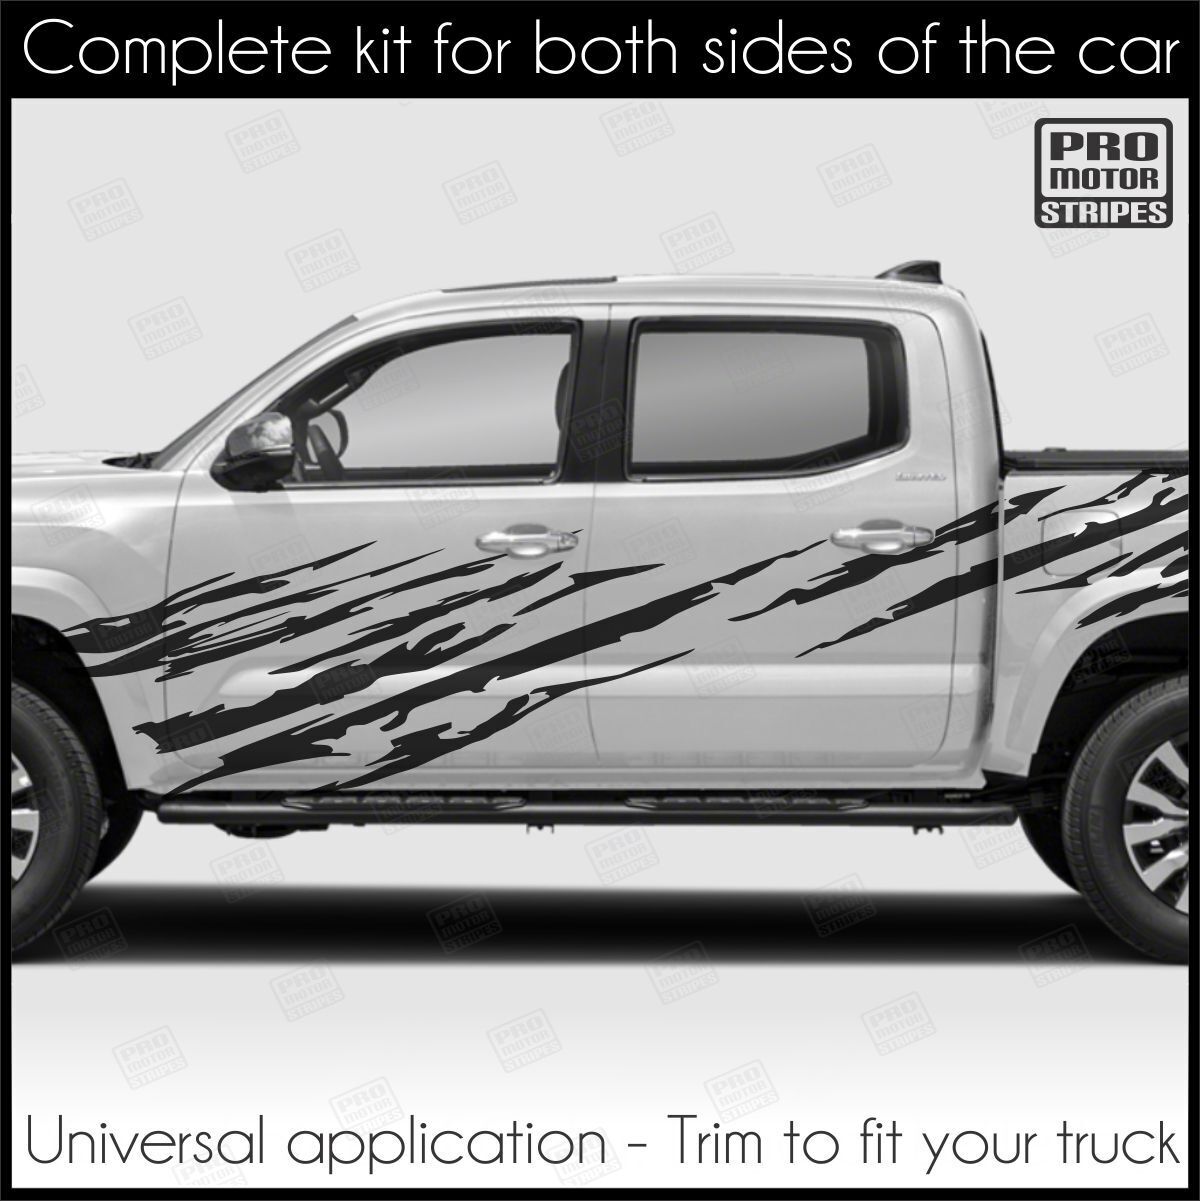 Dodge RAM 1500 2500 3500 Torn Ripped Side Accent Stripes Decals (Choose Color)